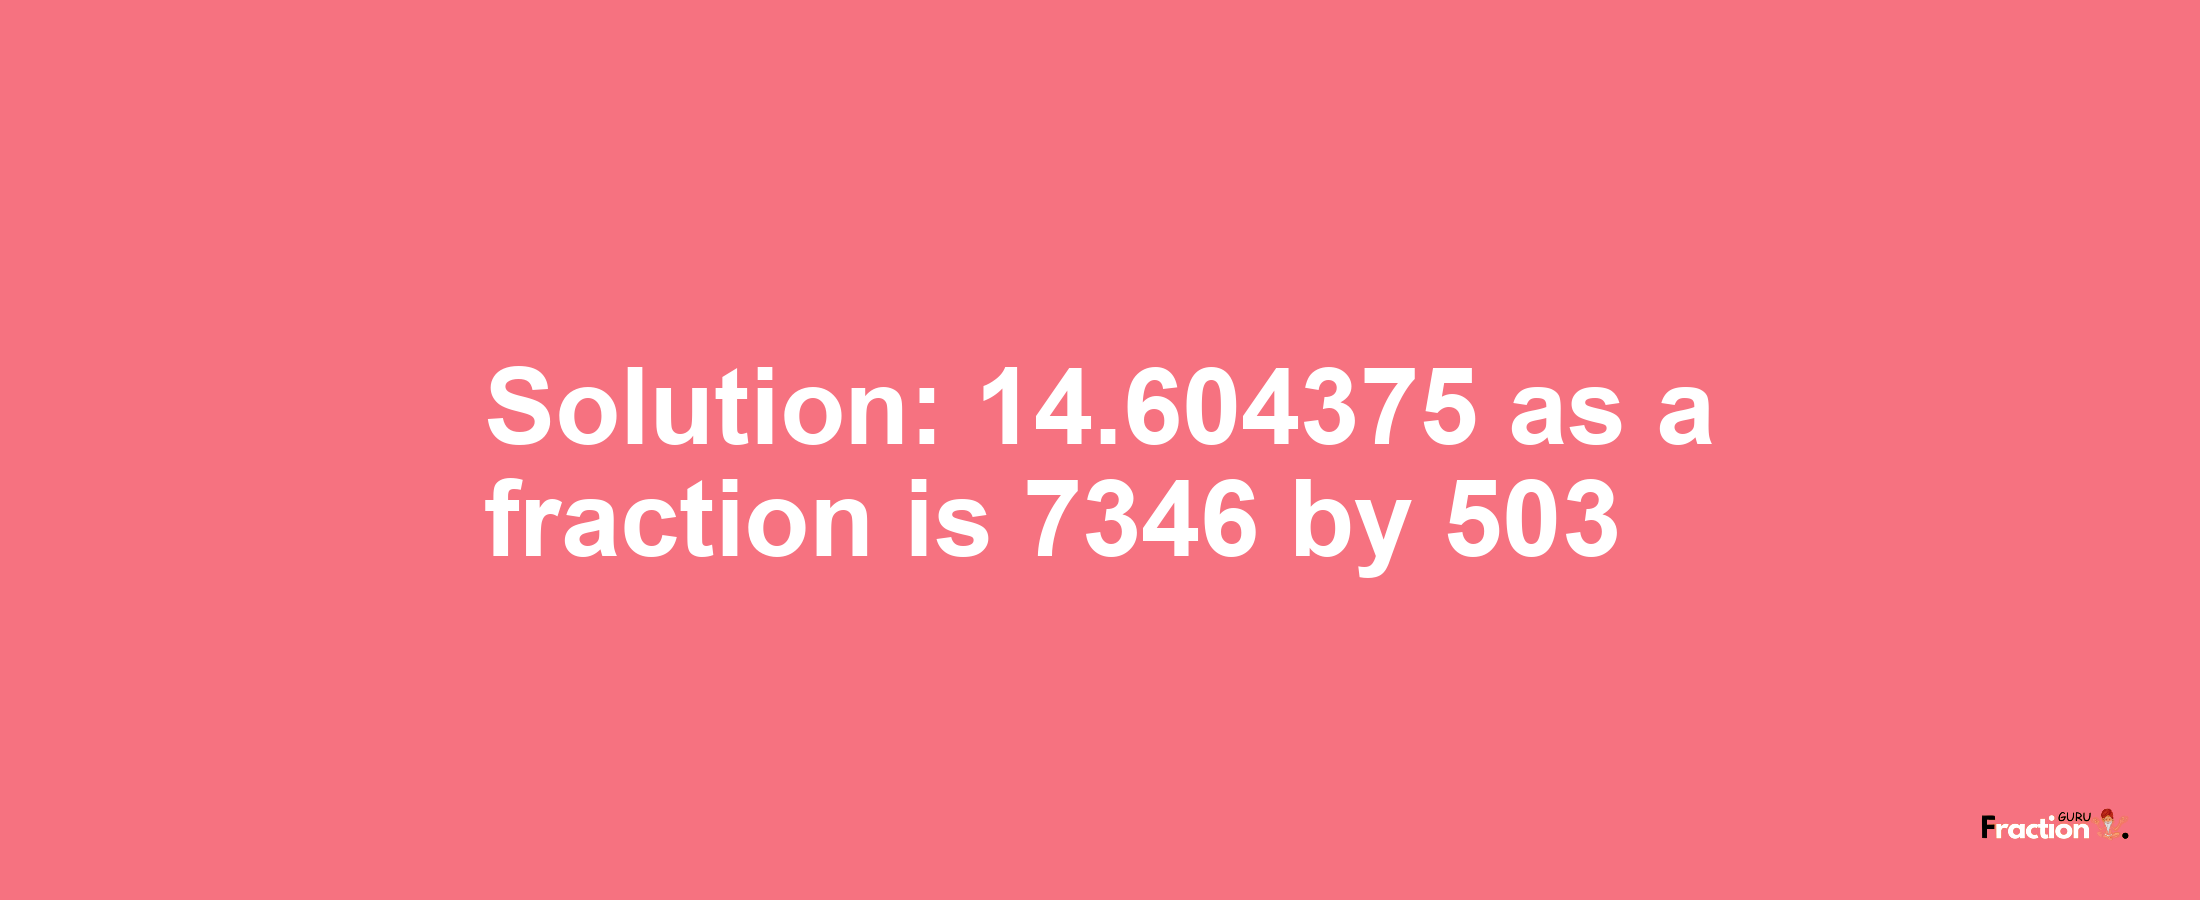 Solution:14.604375 as a fraction is 7346/503